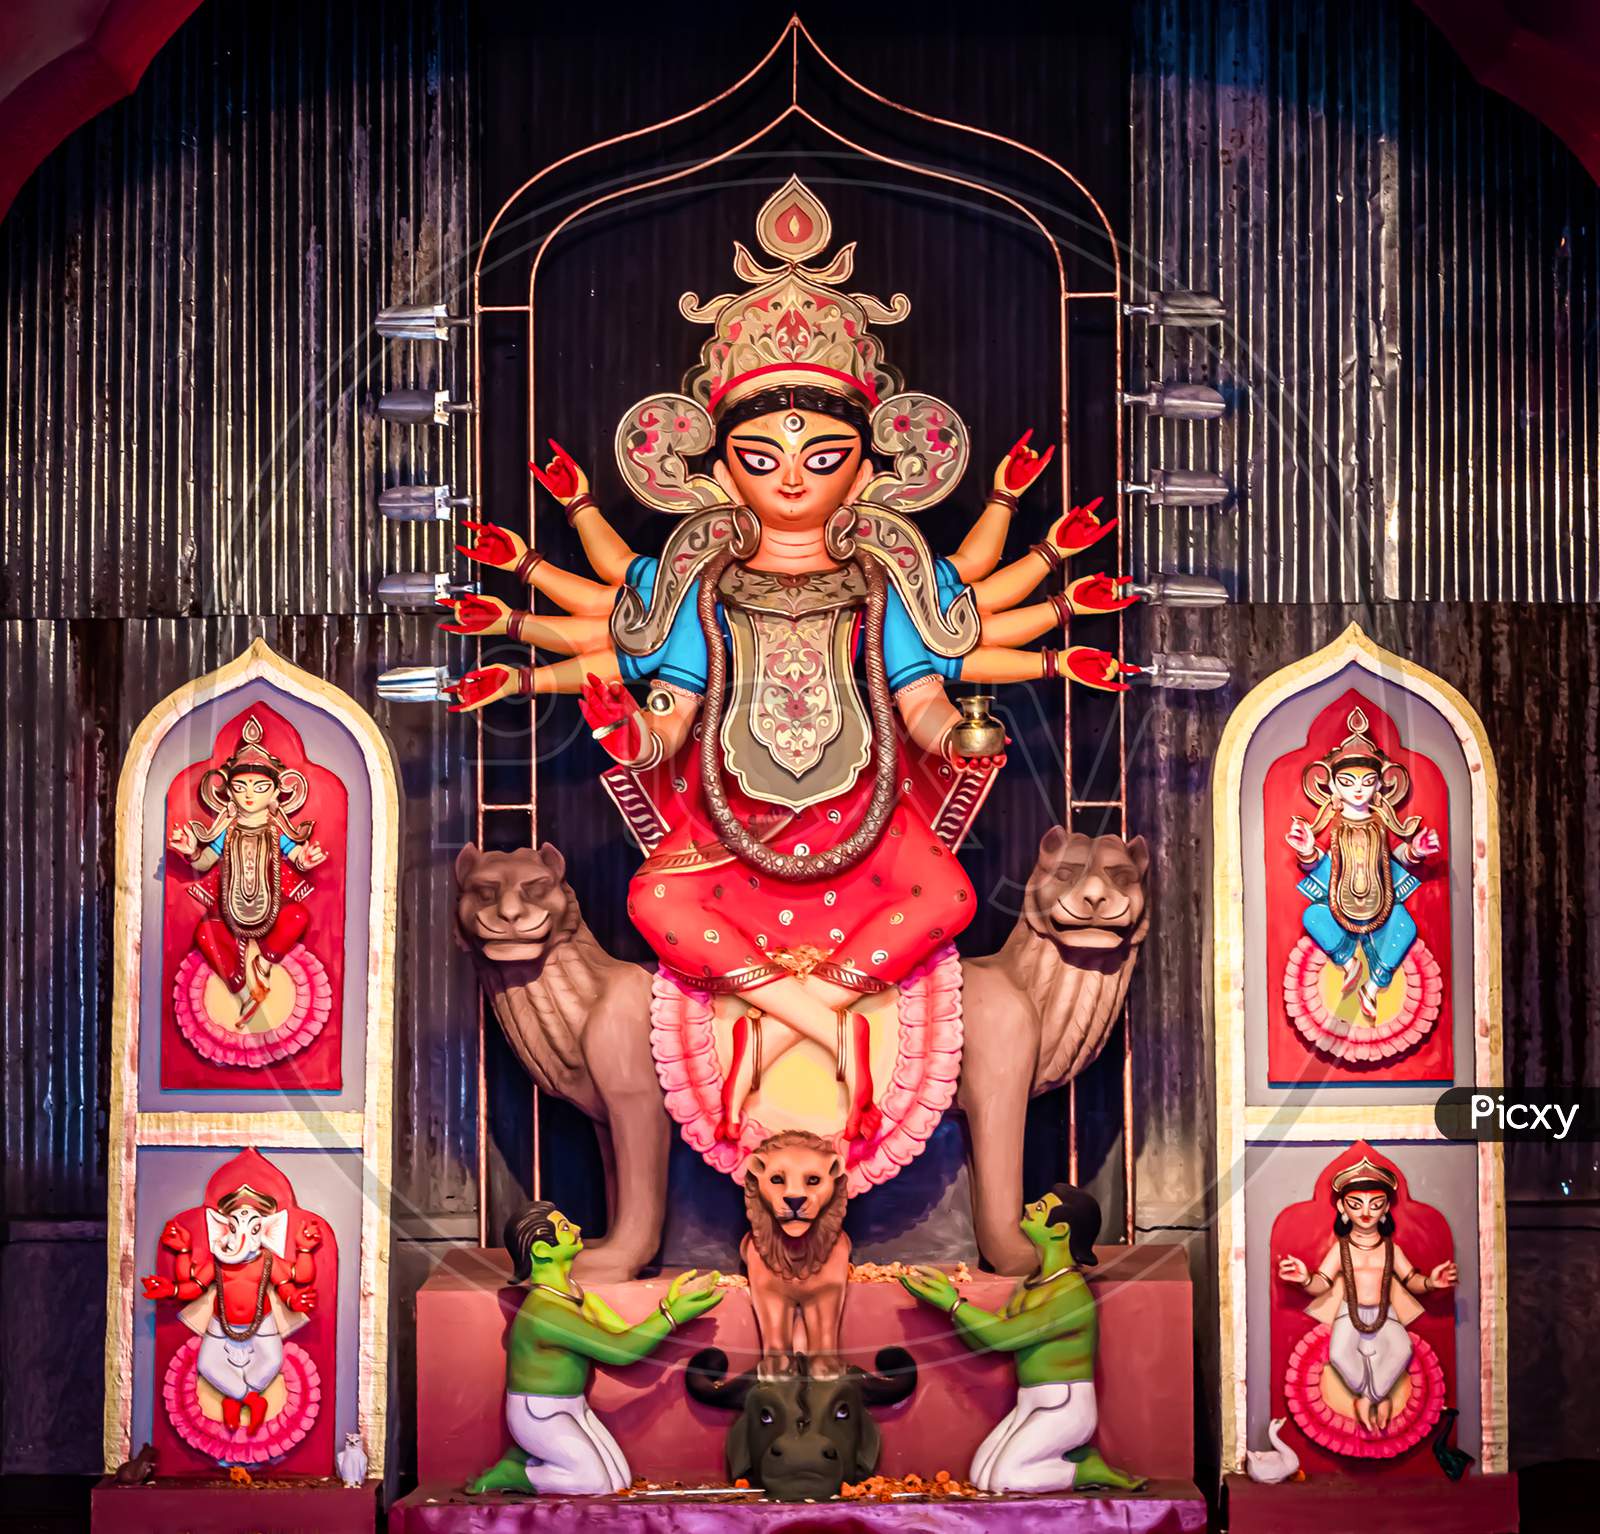 The Supreme Shakti, Maa Durga Is Worshiped In Utmost Devotion In Hindu Religion